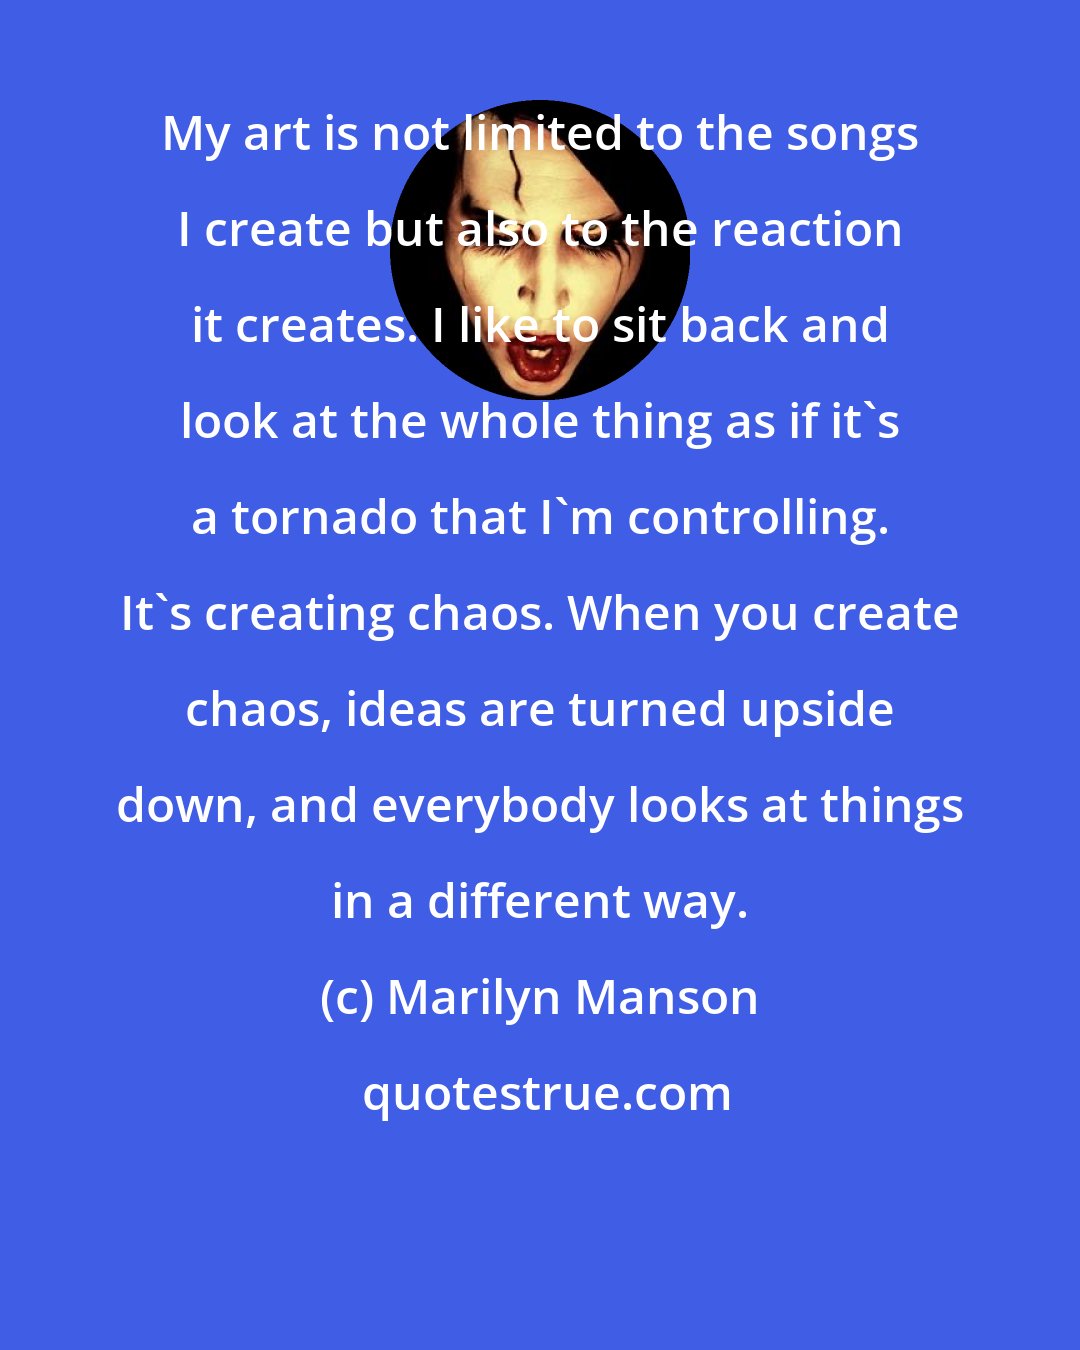 Marilyn Manson: My art is not limited to the songs I create but also to the reaction it creates. I like to sit back and look at the whole thing as if it's a tornado that I'm controlling. It's creating chaos. When you create chaos, ideas are turned upside down, and everybody looks at things in a different way.